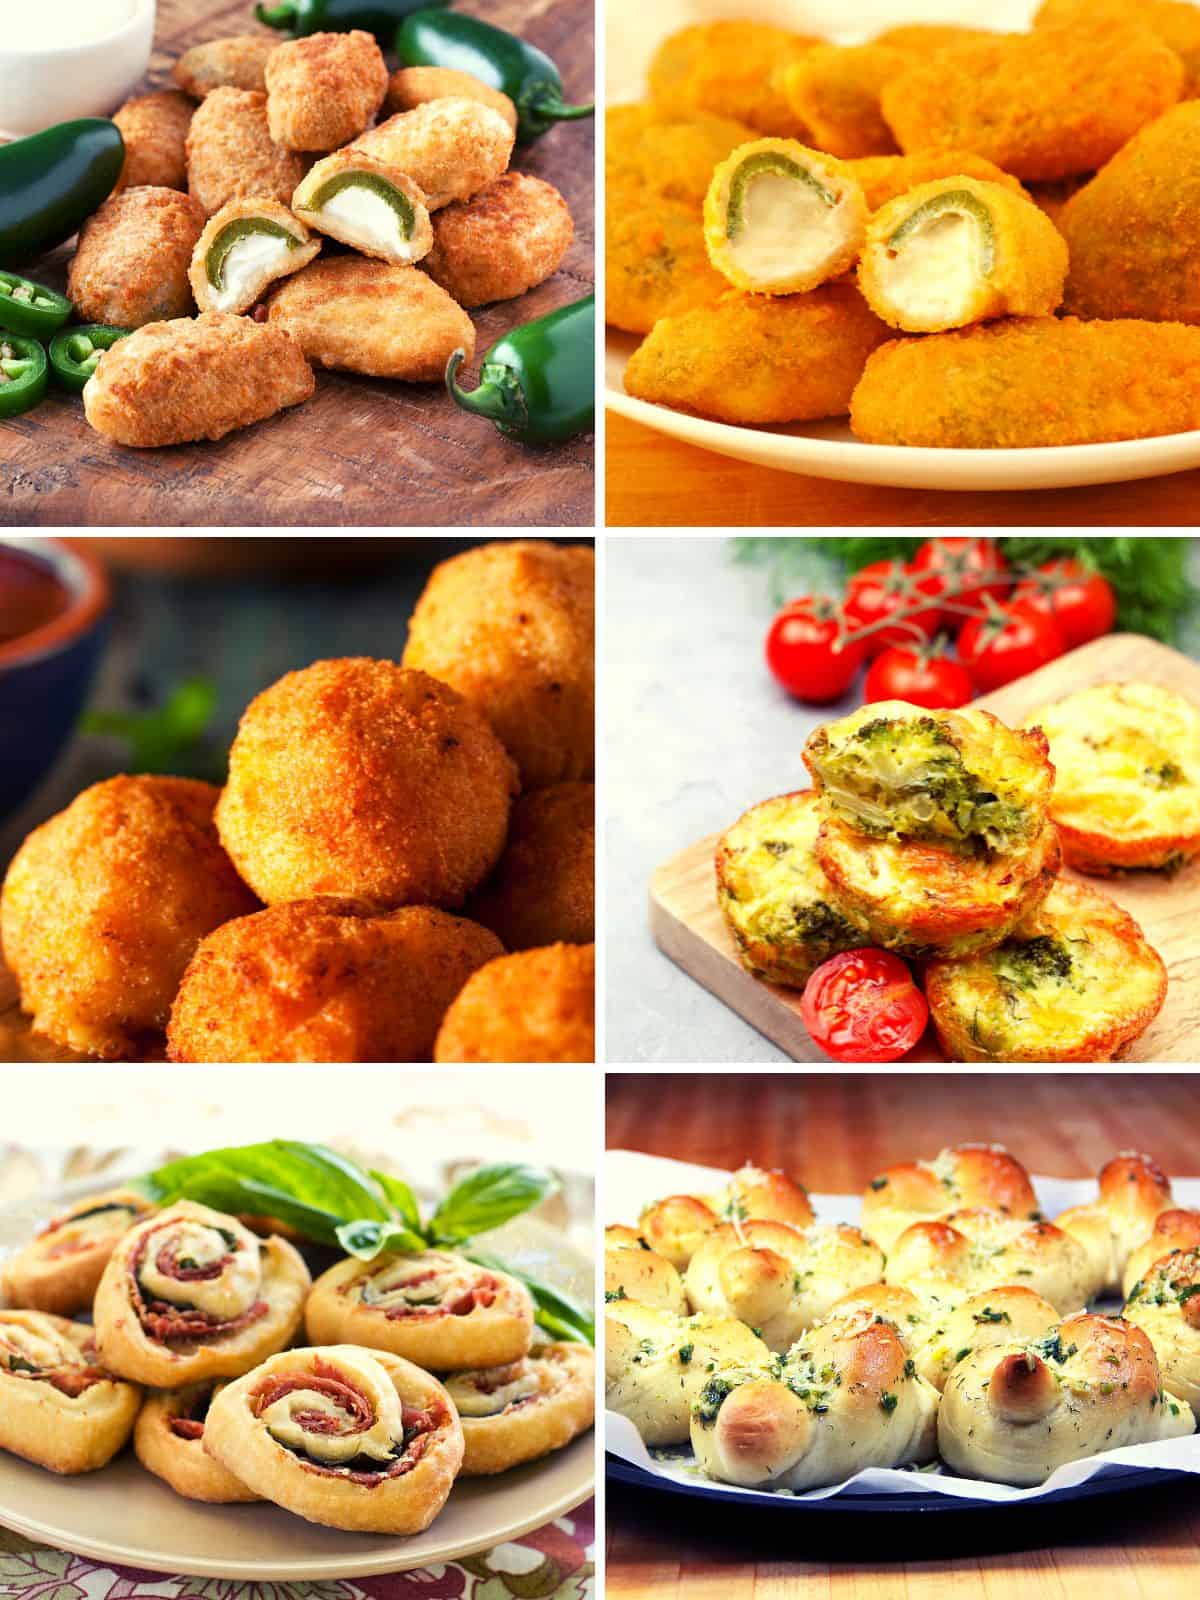 christmas finger foods to have fun as appetizers during parties or gatherings shown in a collage form